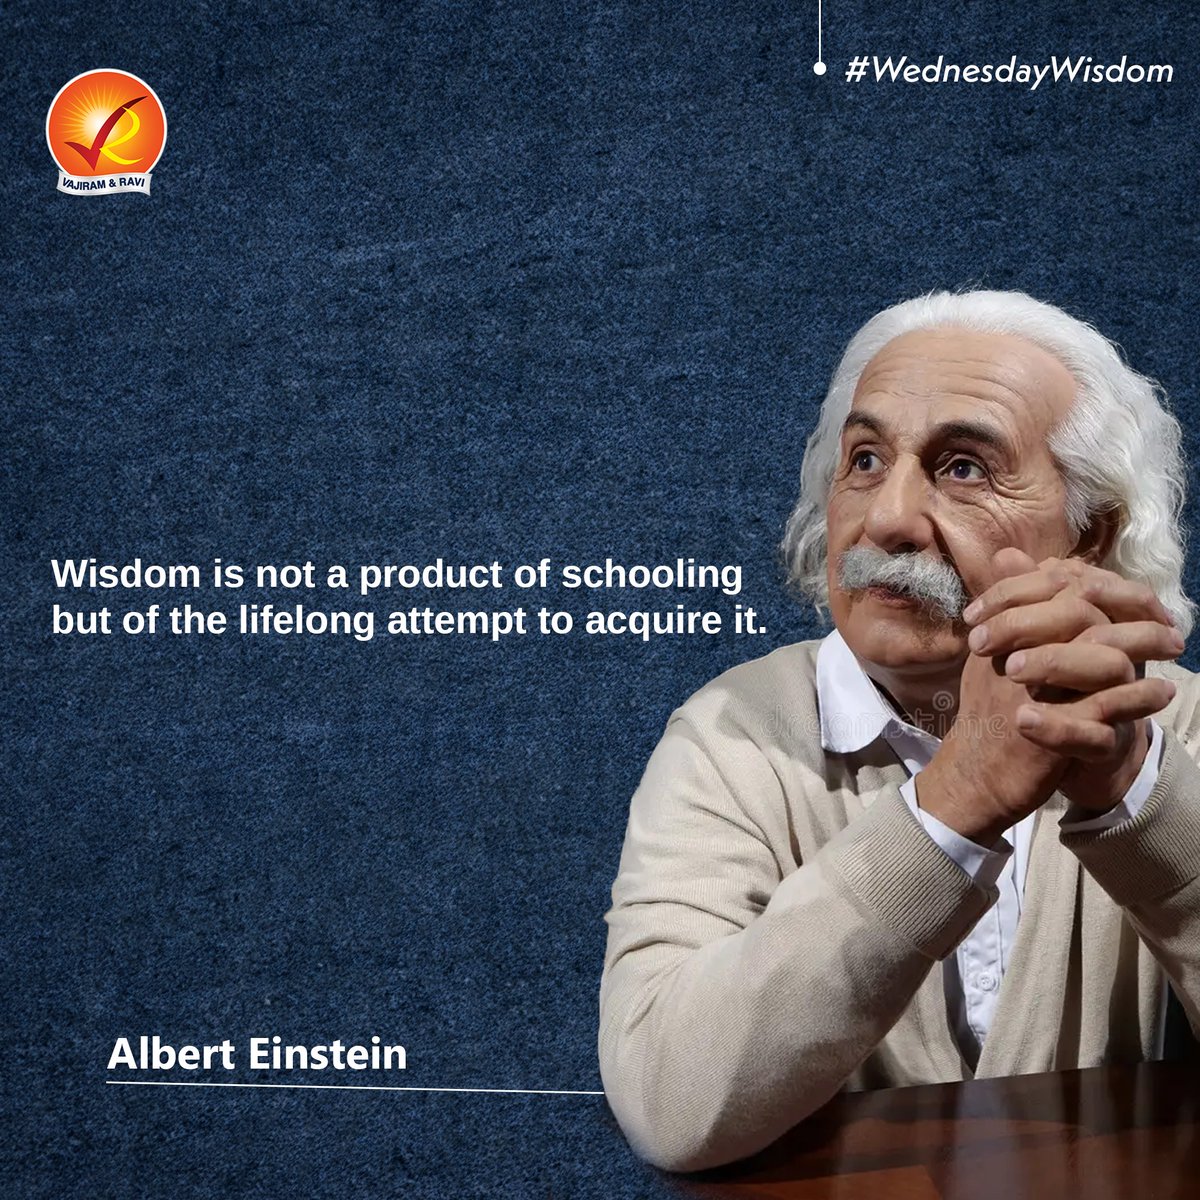 #WednesdayWisdom 💡 | Wisdom is not a product of schooling but of the lifelong attempt to acquire it.

#wednesdaymotivation #wednesdayvibes #wednesdaymood  #wisdom #philosophy #wisdomquotes #wordsofwisdom #wellnesswednesday #inspirationoftheday #upsc #iascoaching #ias